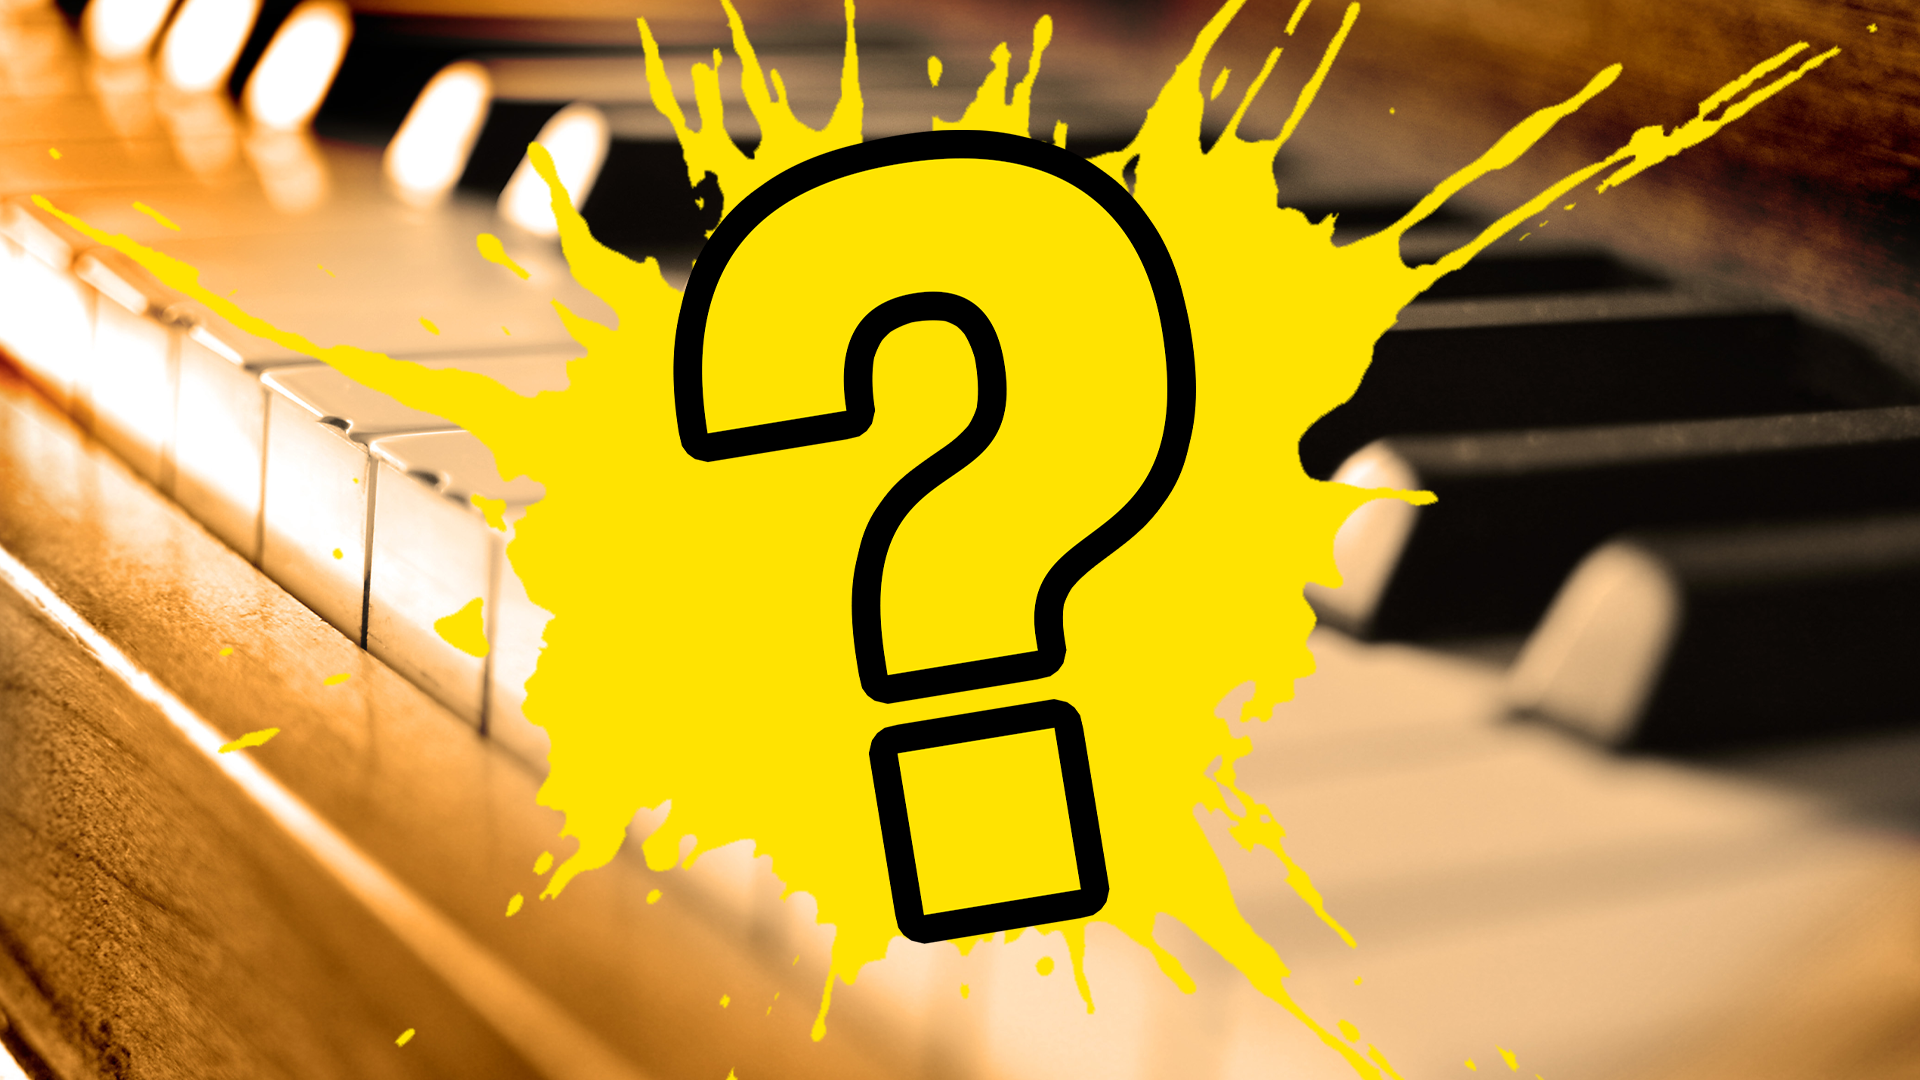 Piano keyboard with beano splat and question mark